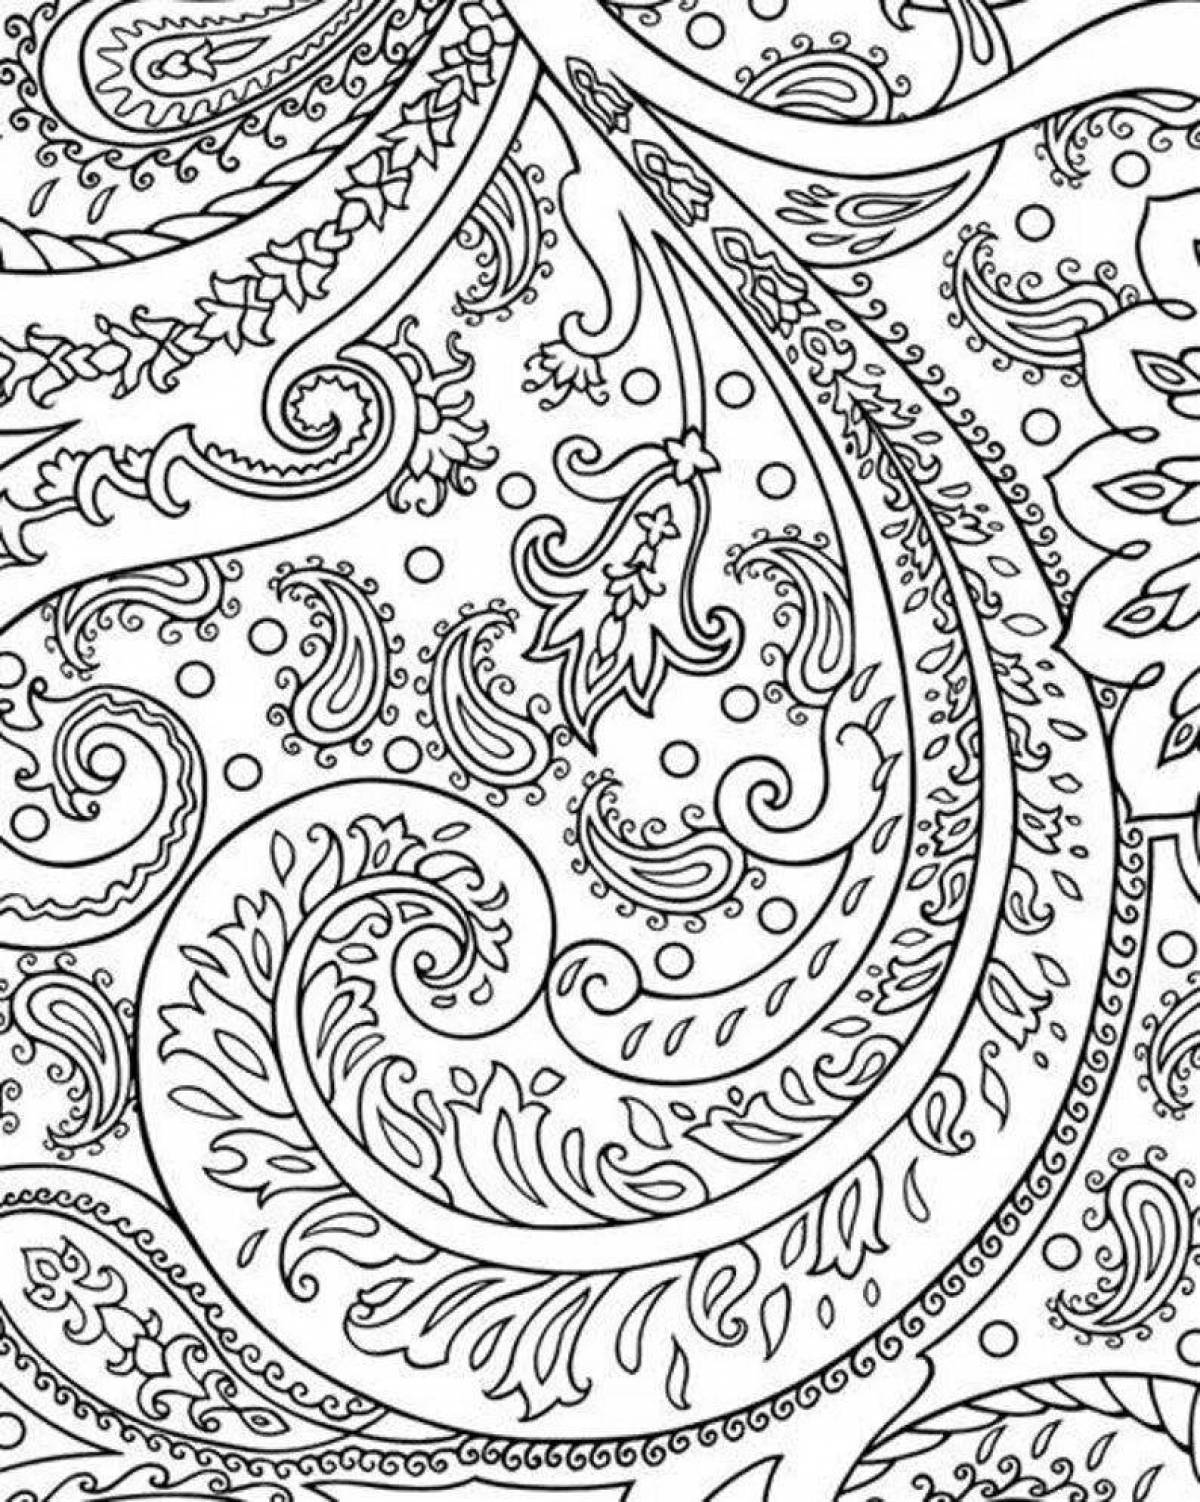 Serene coloring page templates